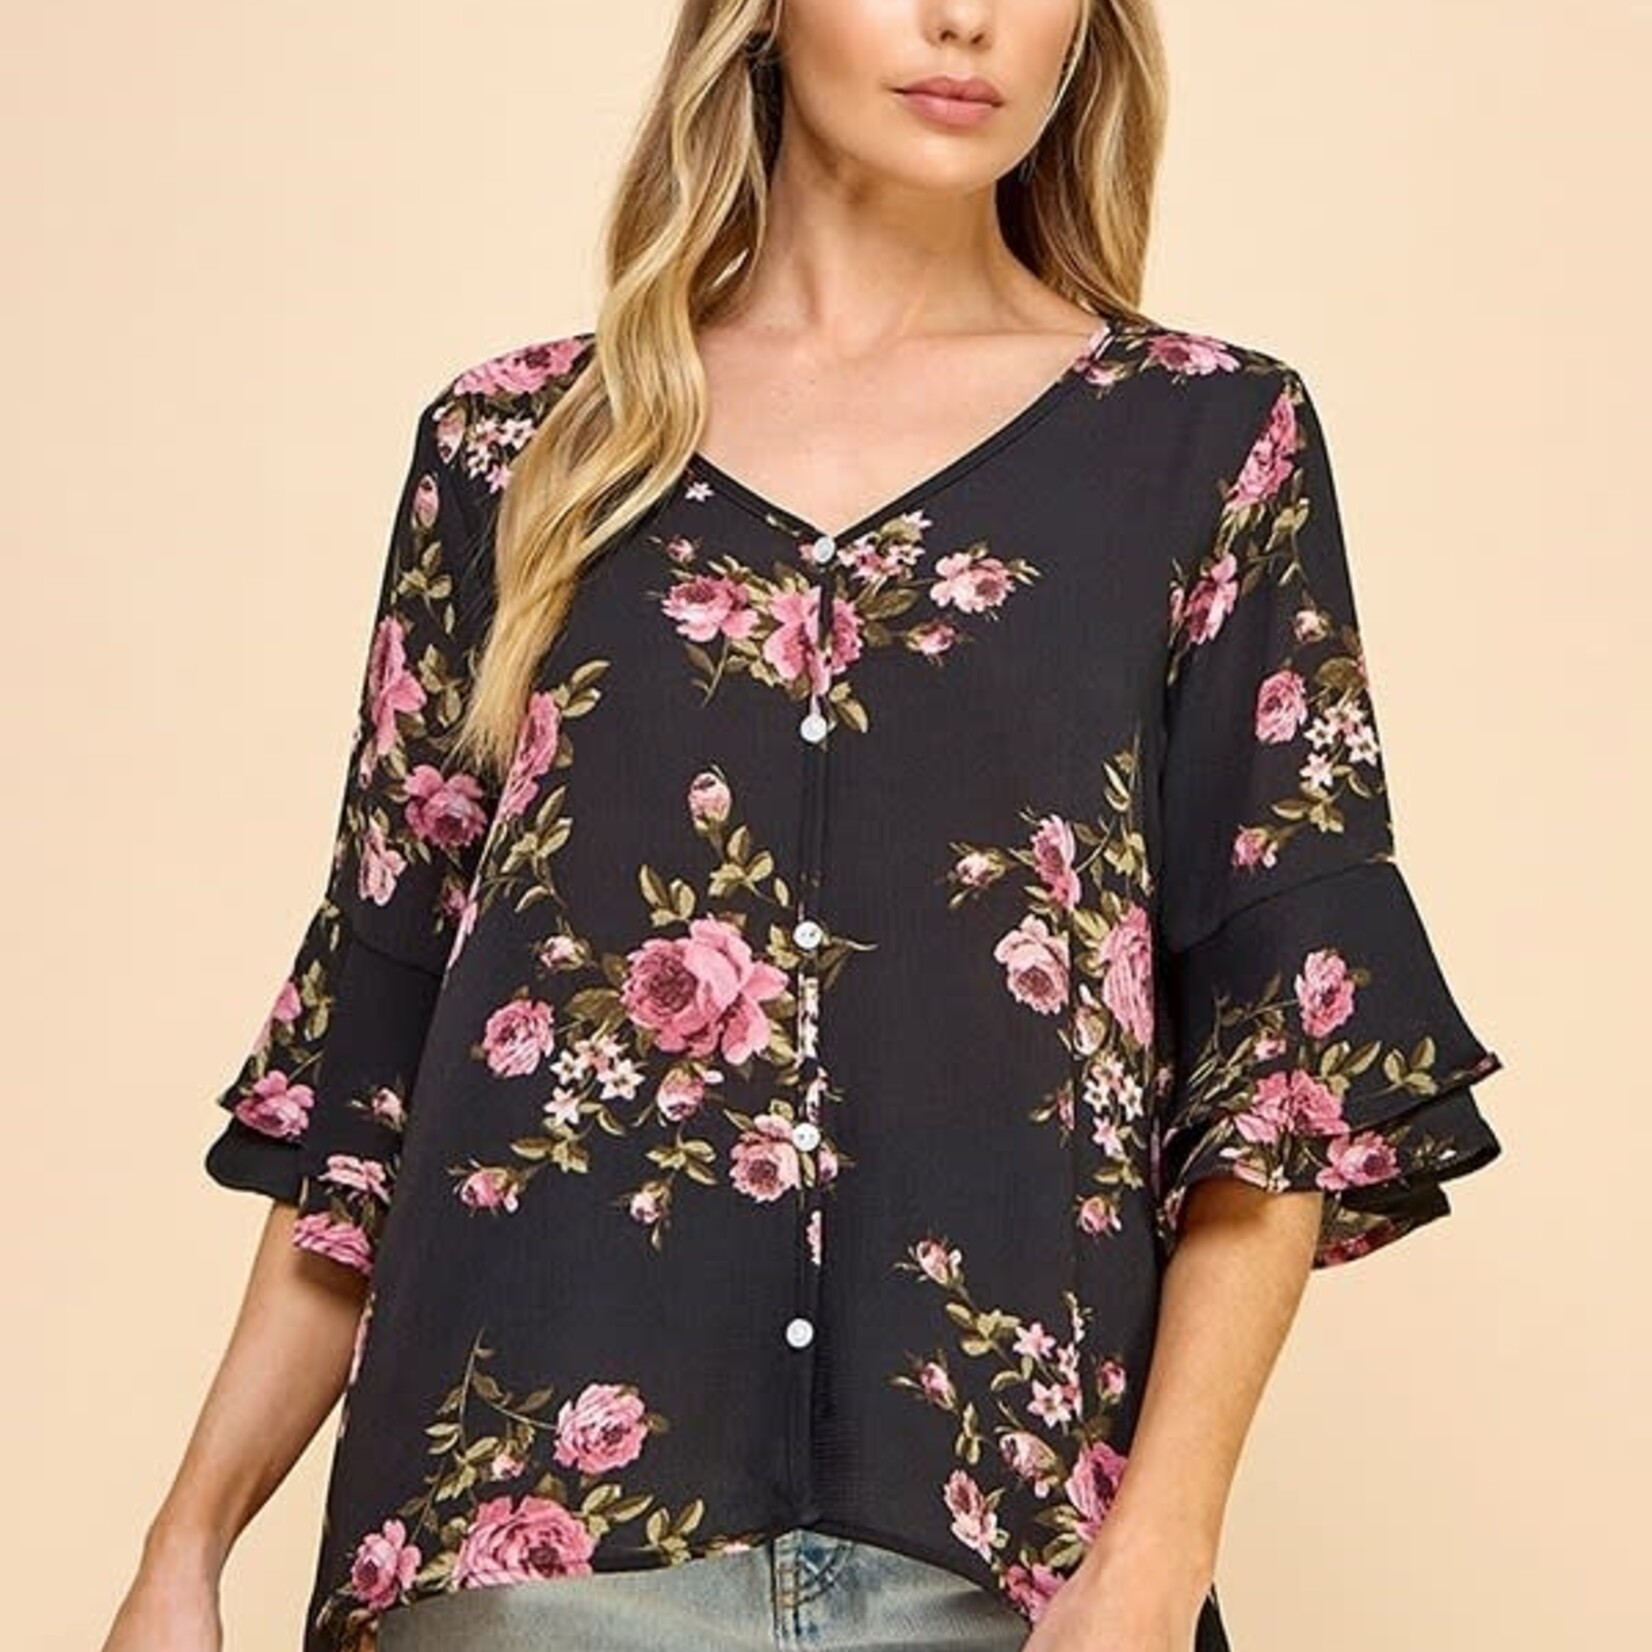 True Lovely Floral Top